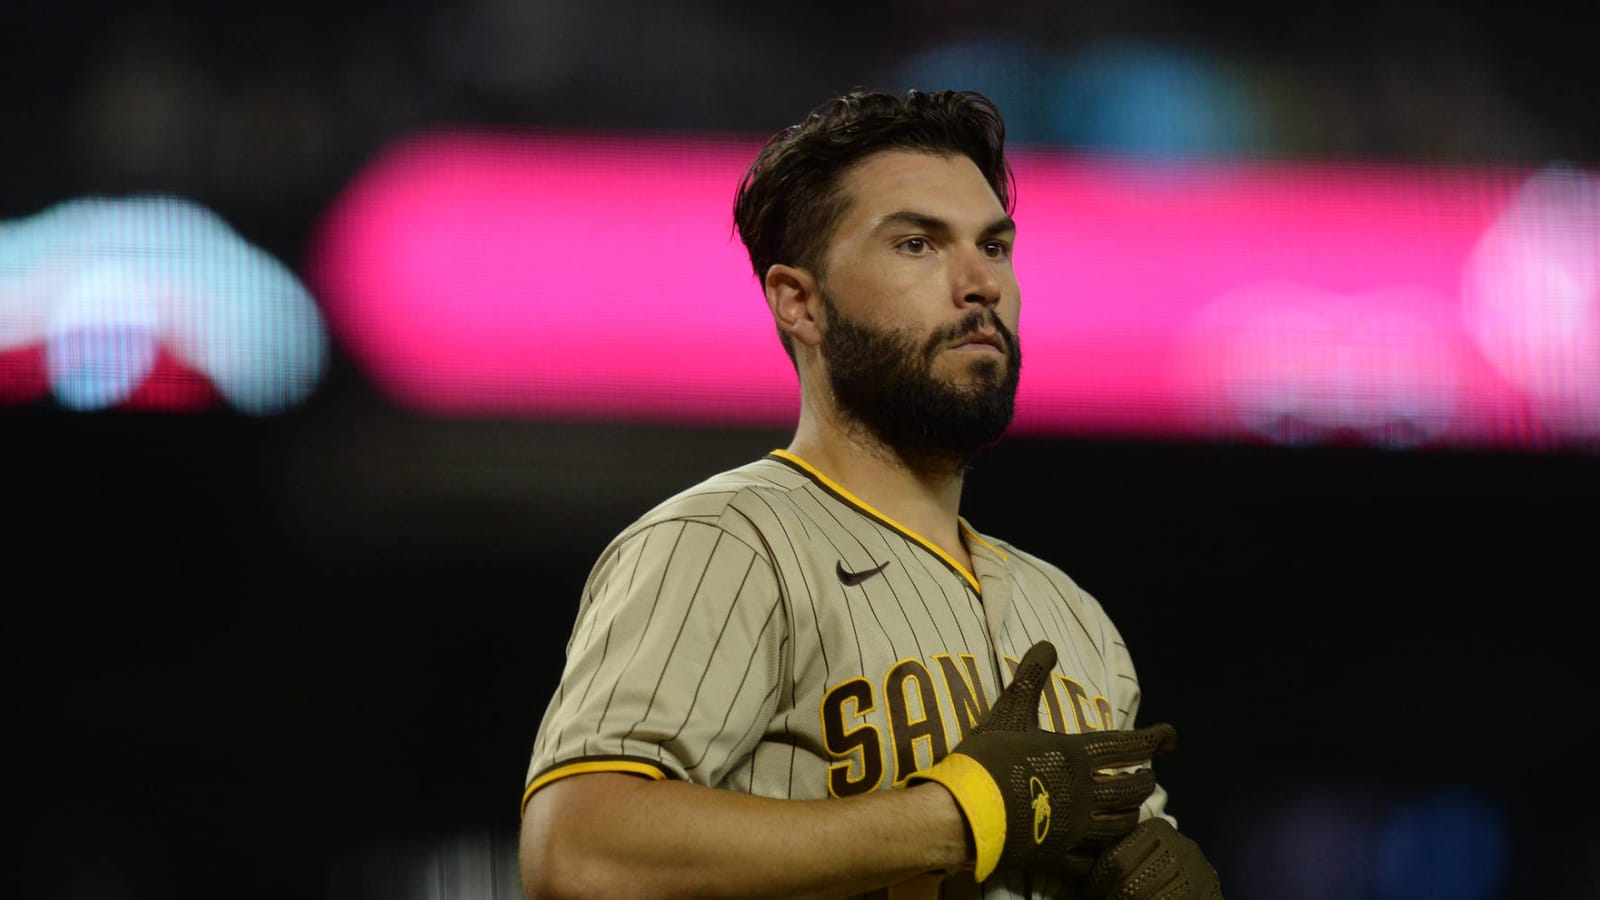 Eric Hosmer: All I ever wanted was to win a championship in San Diego